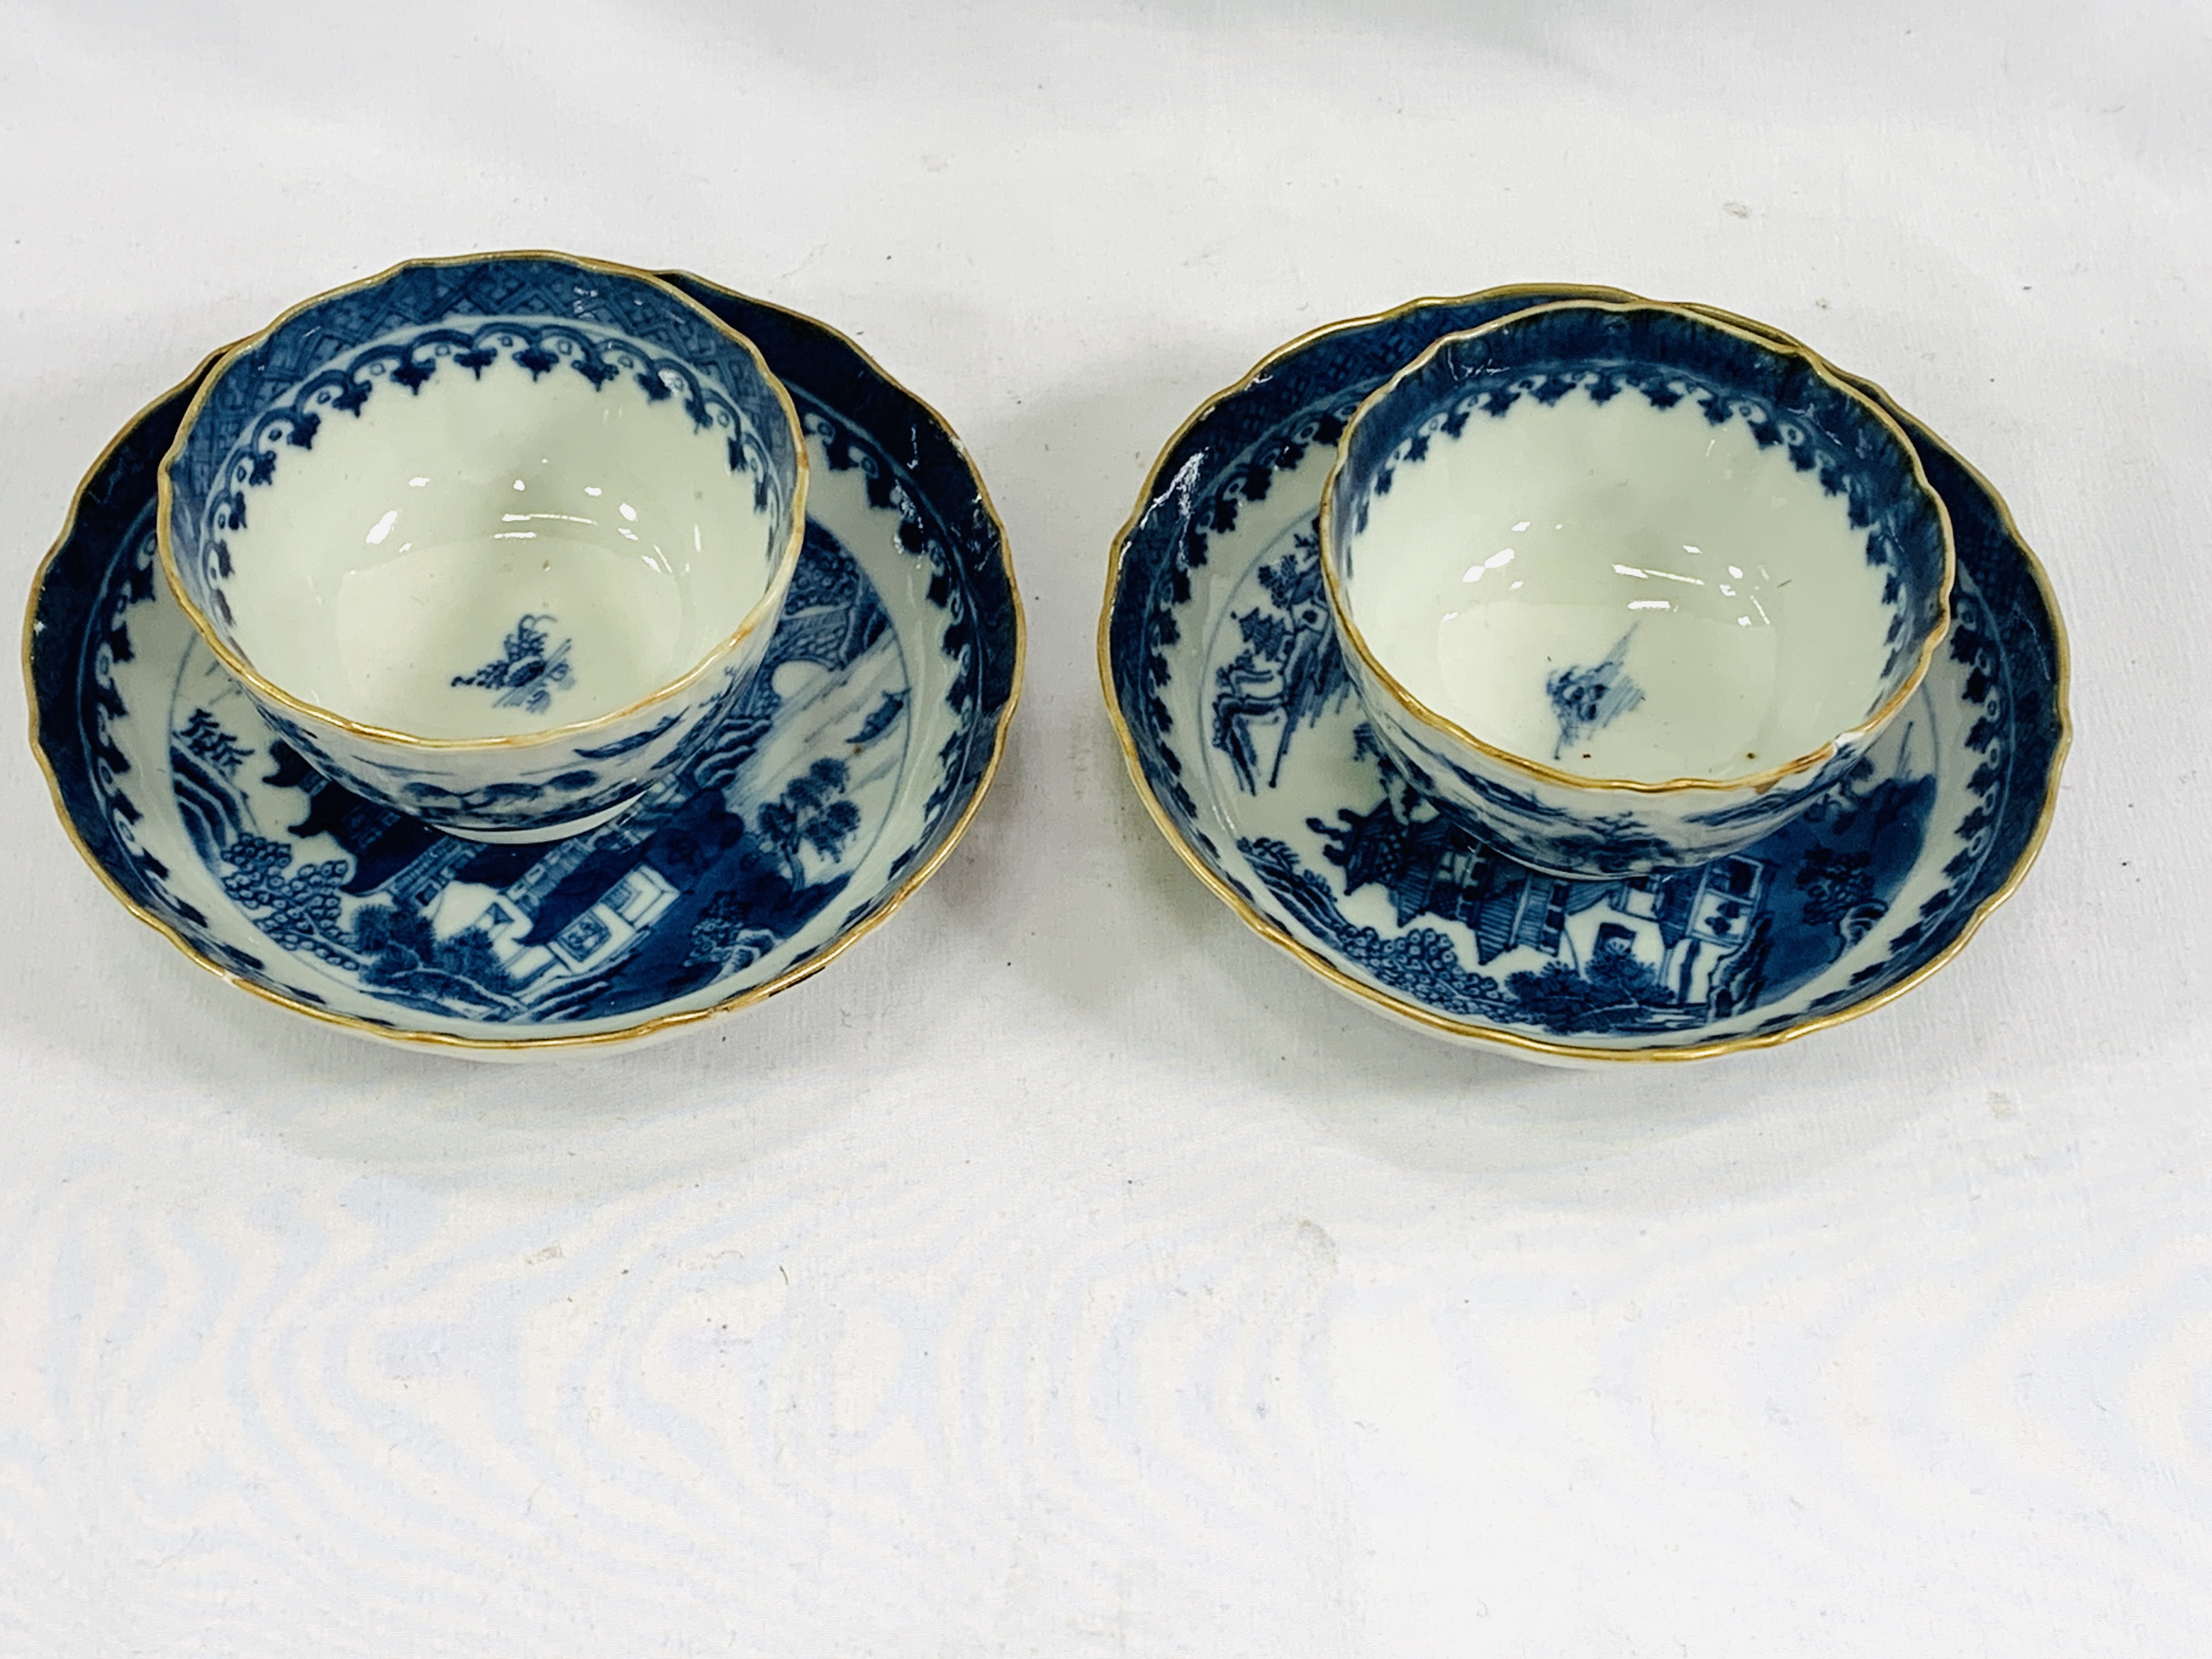 Two blue and white tea bowls and saucers - Image 2 of 4